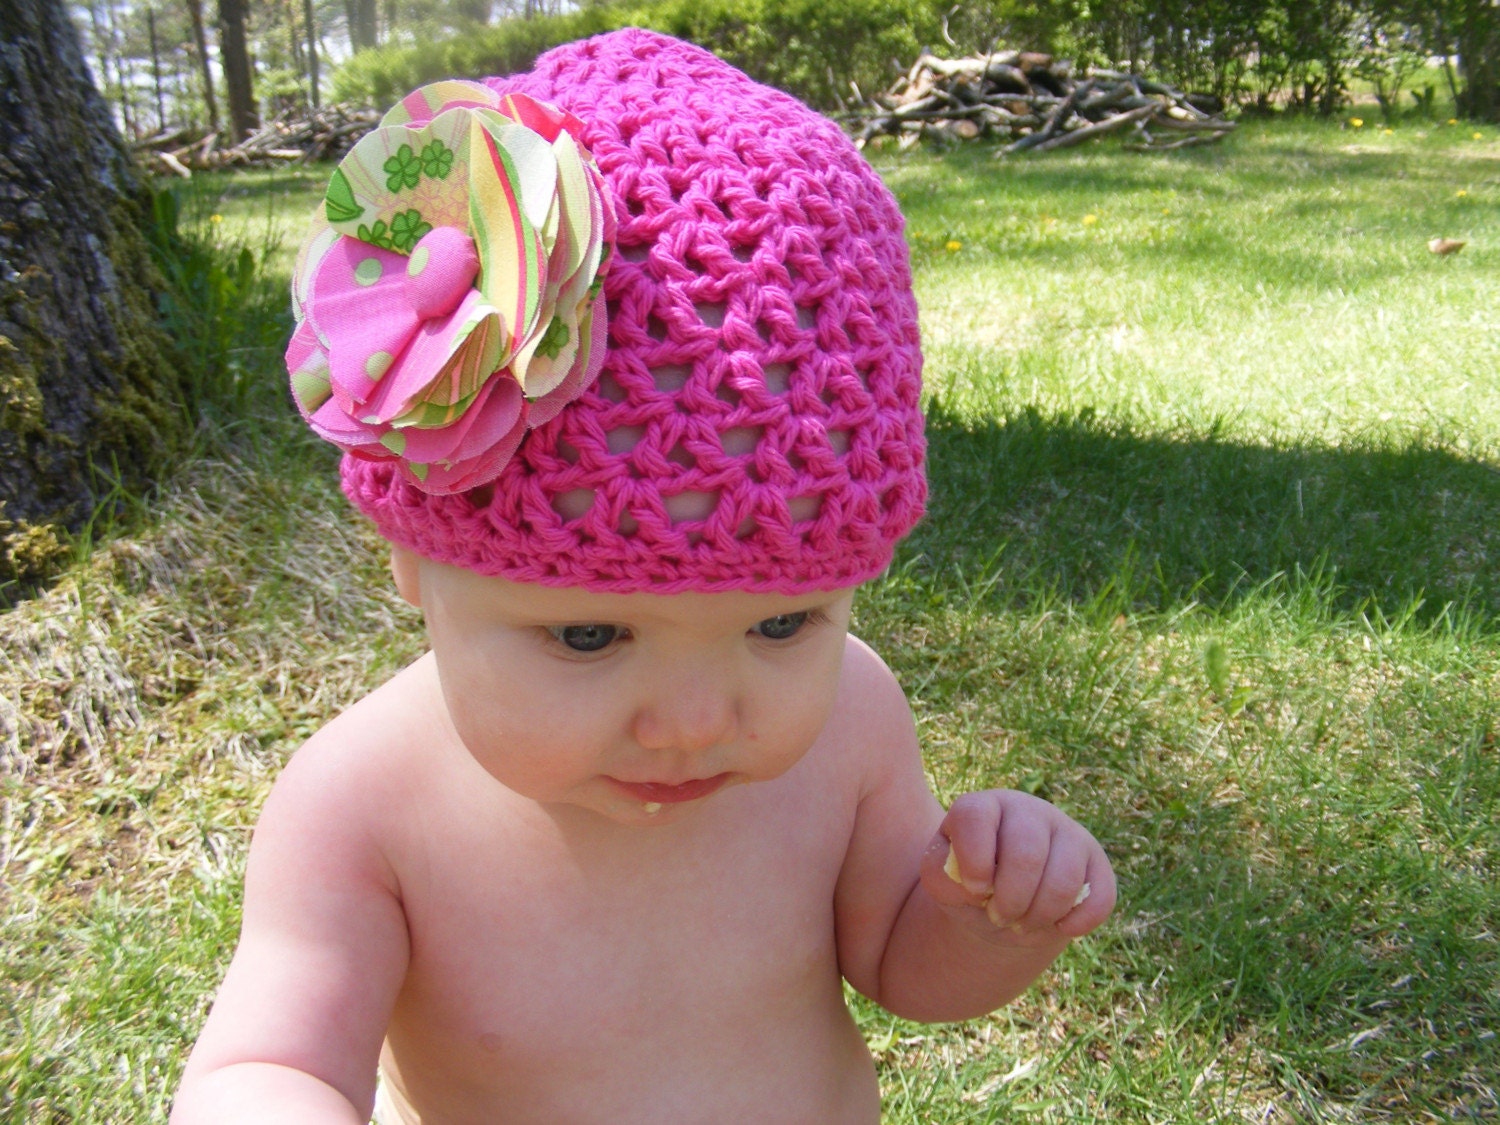 Great Deal 2 Interchangeable flower clips, one hat, and one headband 12-24 months